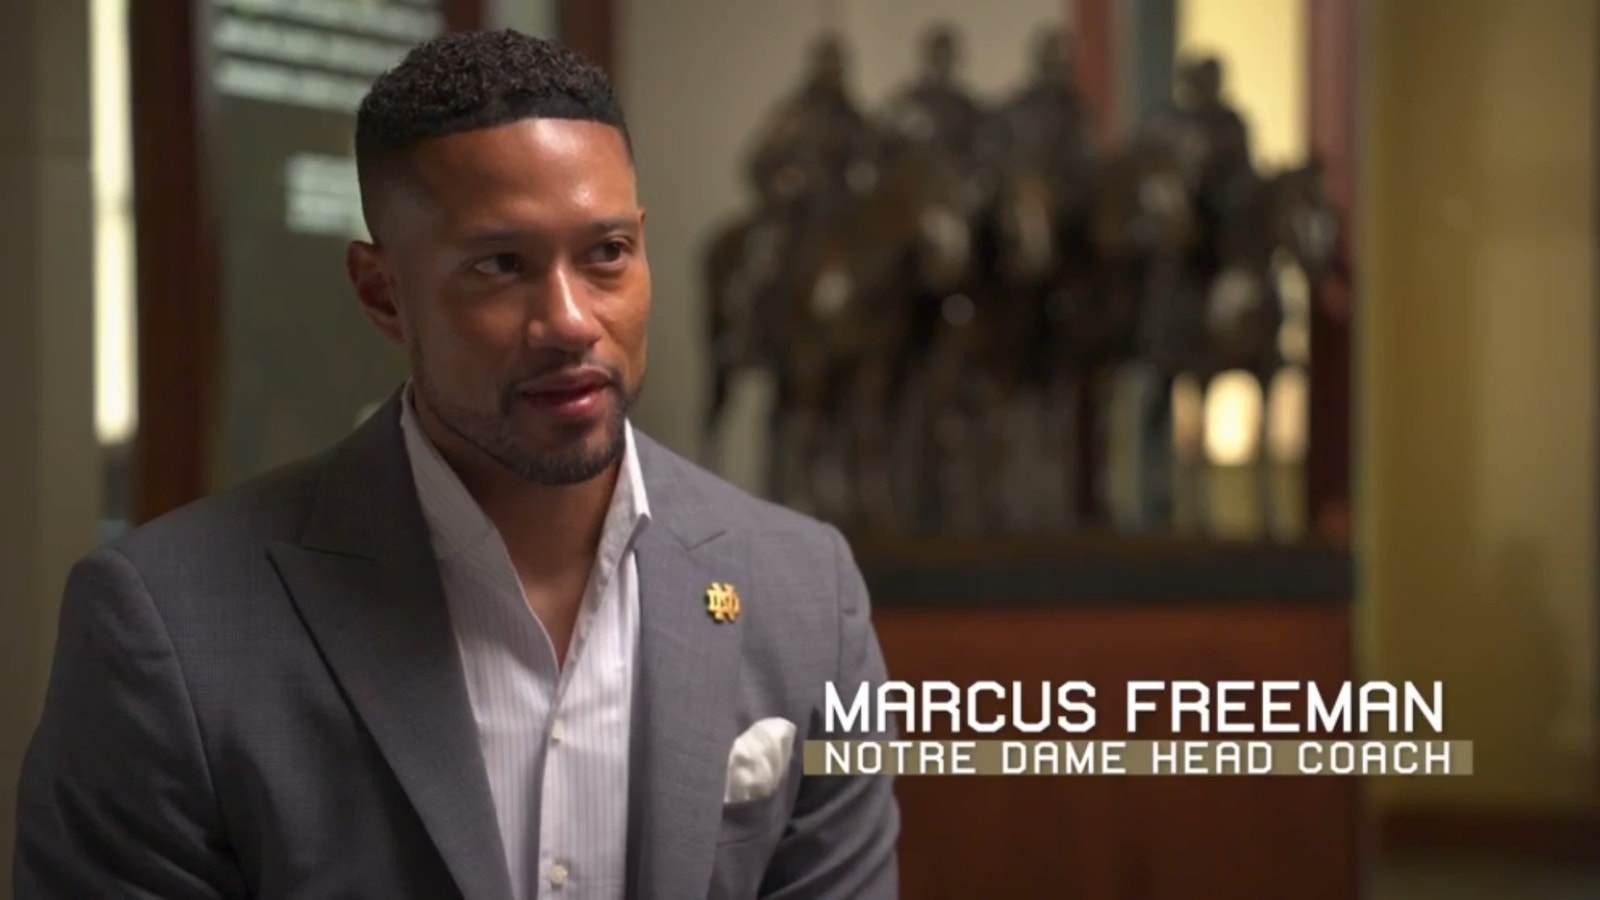 Notre Dame's Marcus Freeman talks expectations, playing Ohio State and more.